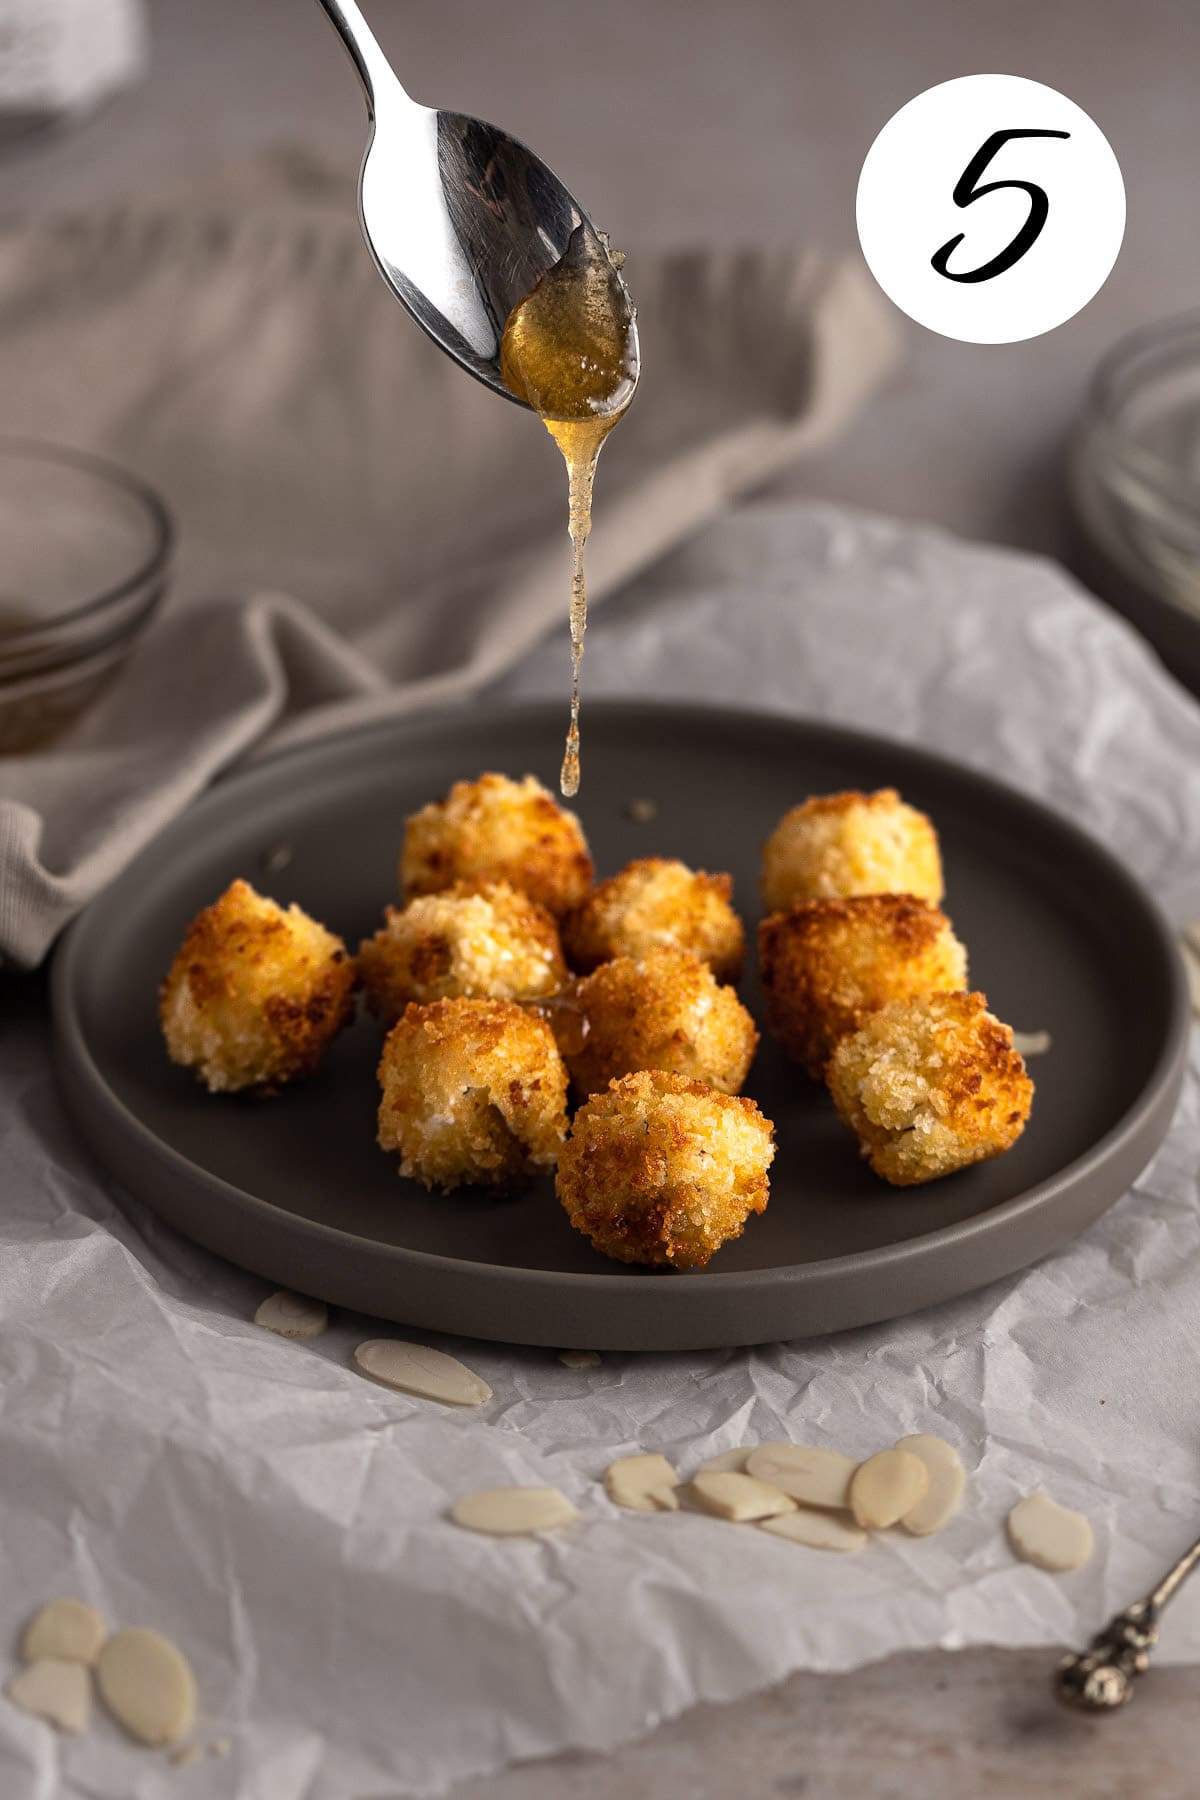 A spoonful of honey being drizzled over the croquettes.